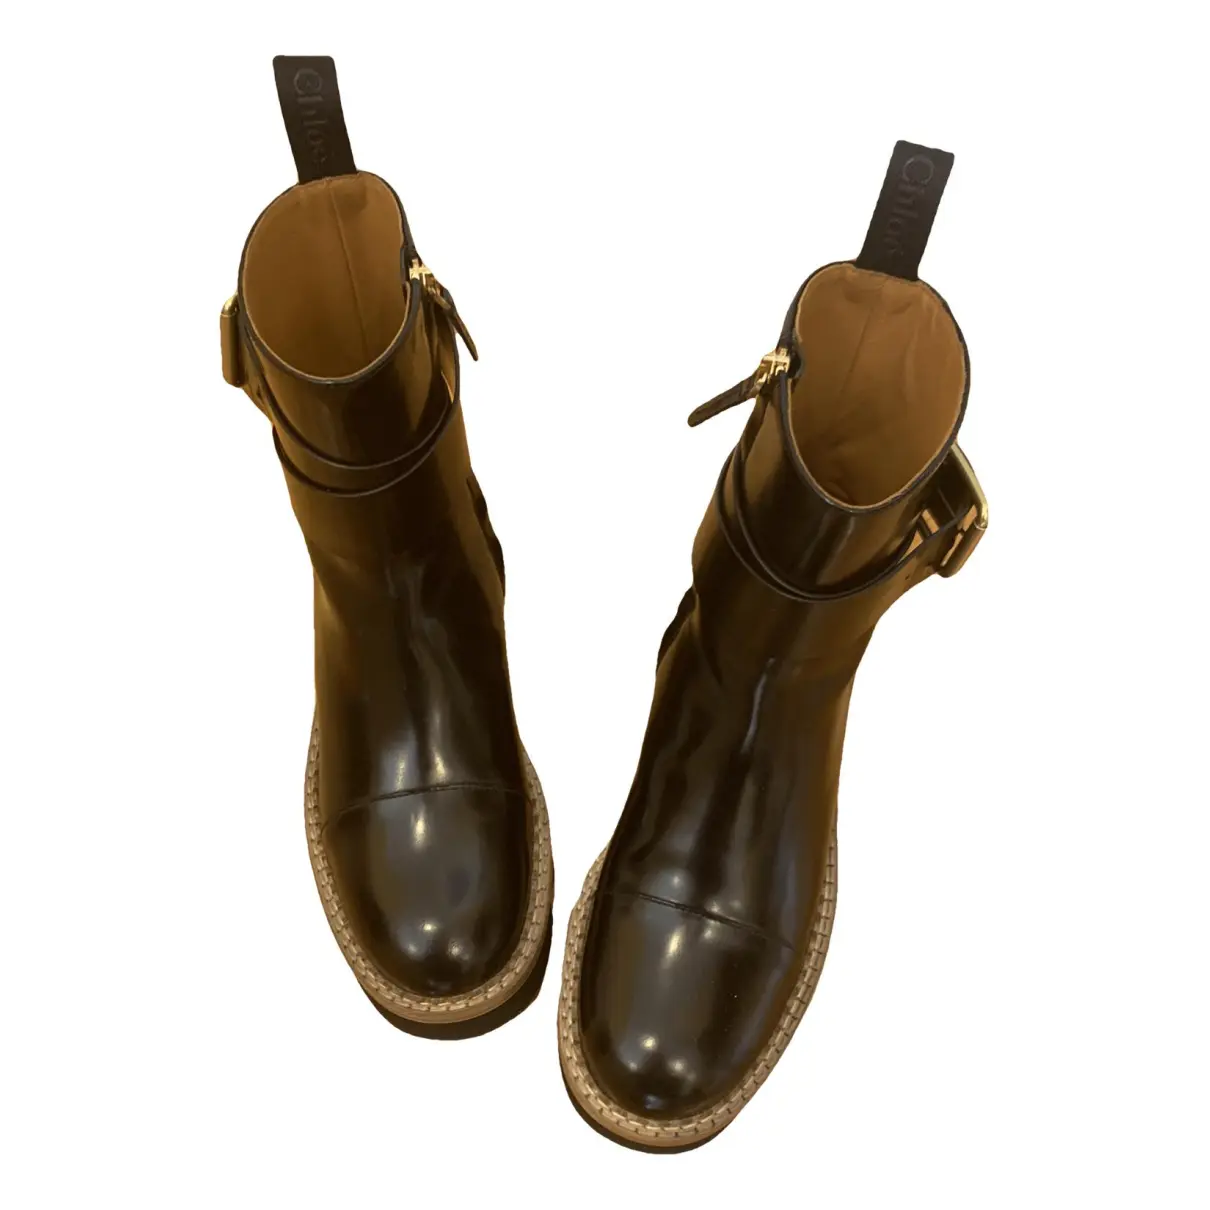 Owena leather riding boots